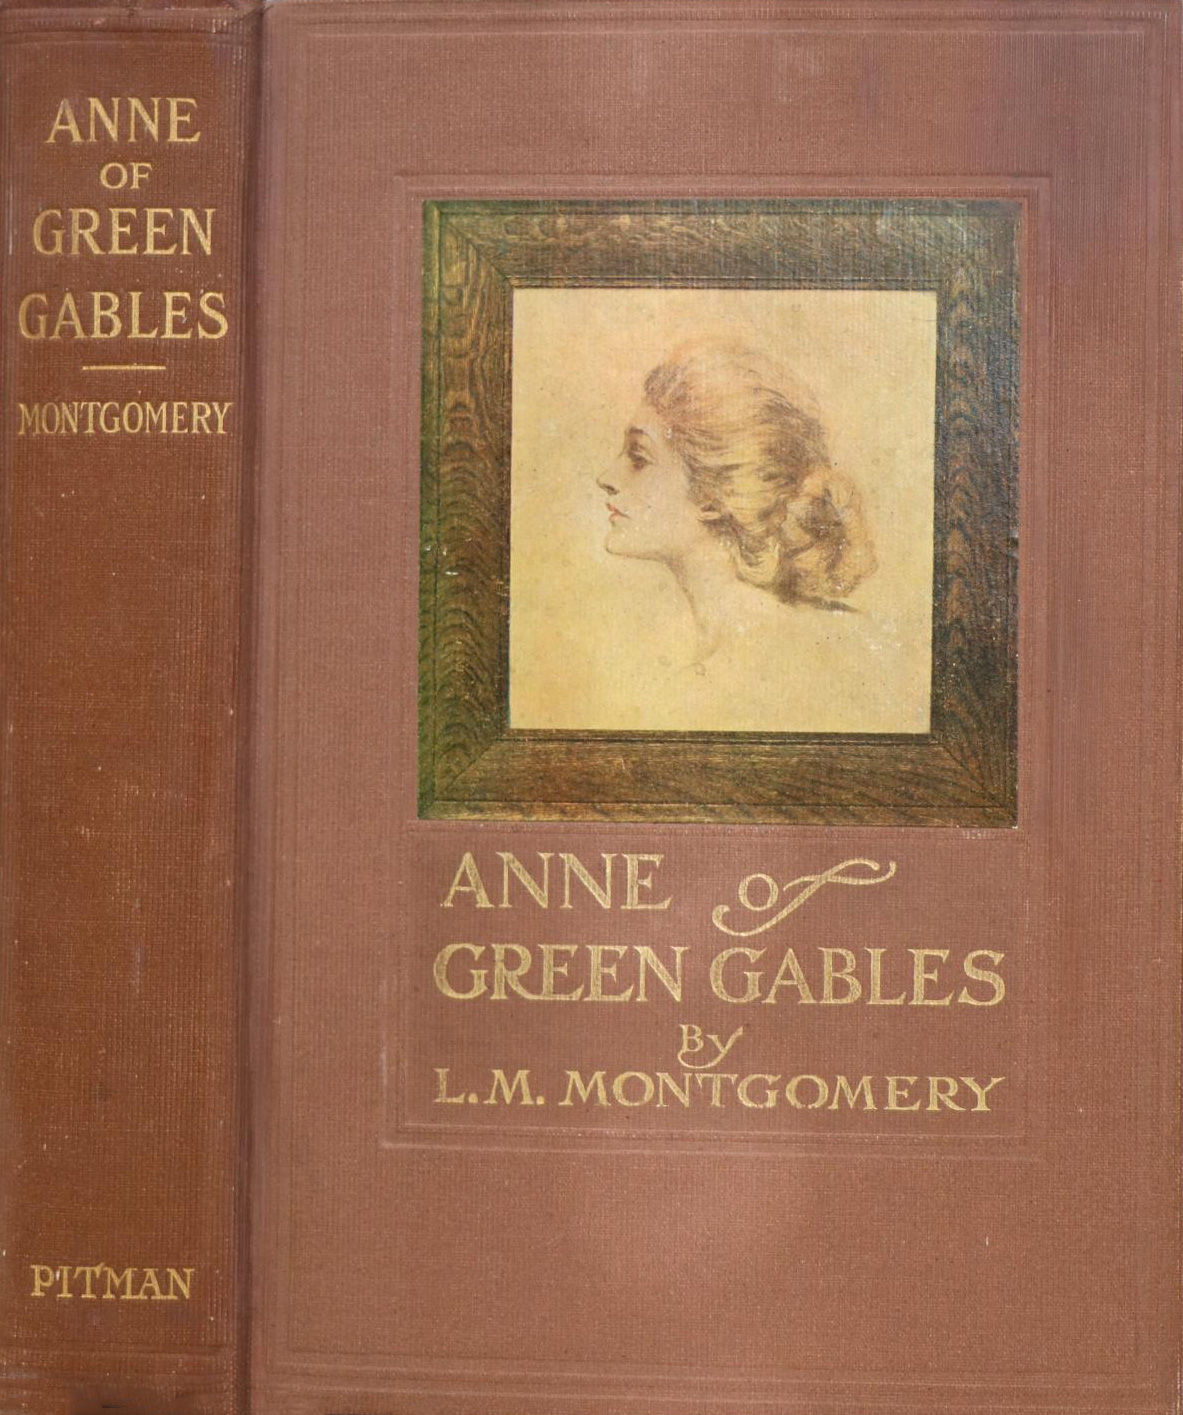 Old book cover with a pen and ink side profile of a young woman wearing an Edwardian hairstyle. Text: 'Anne of Green Gables / by L. M. Montgomery'